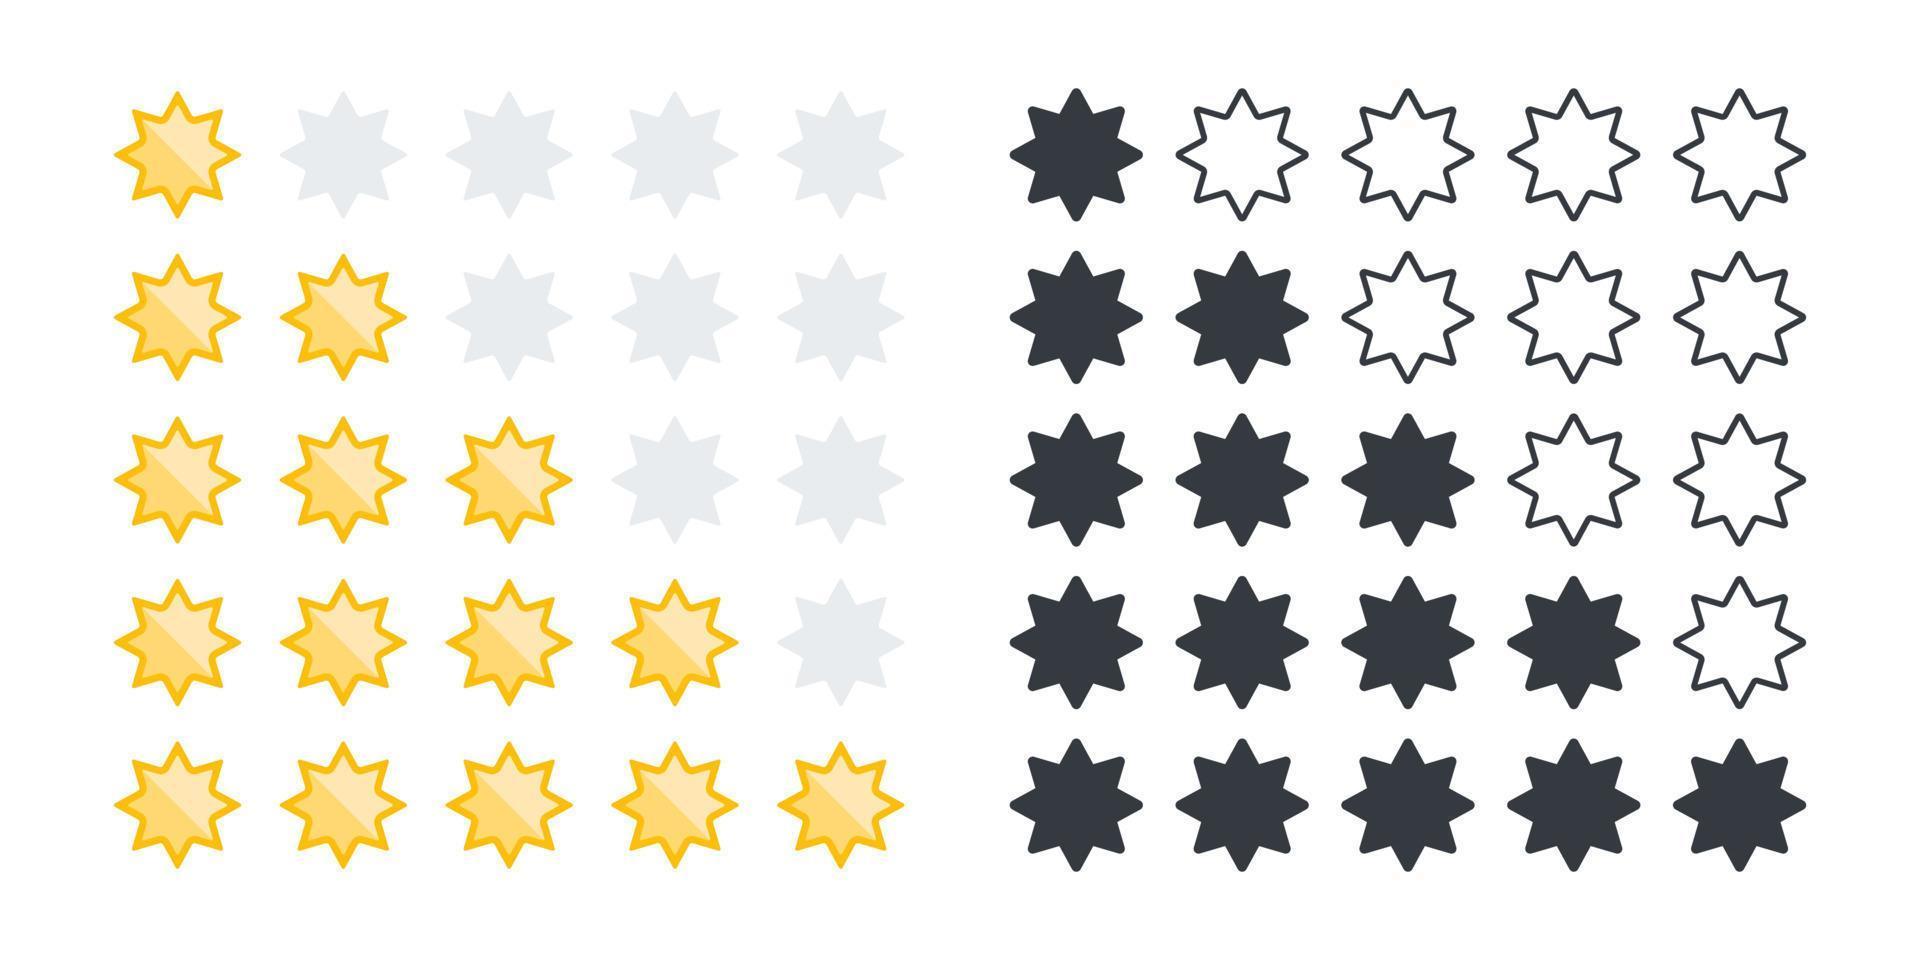 Rating stars icons set. Product rating or customer review with gold stars and black stars. Vector icons